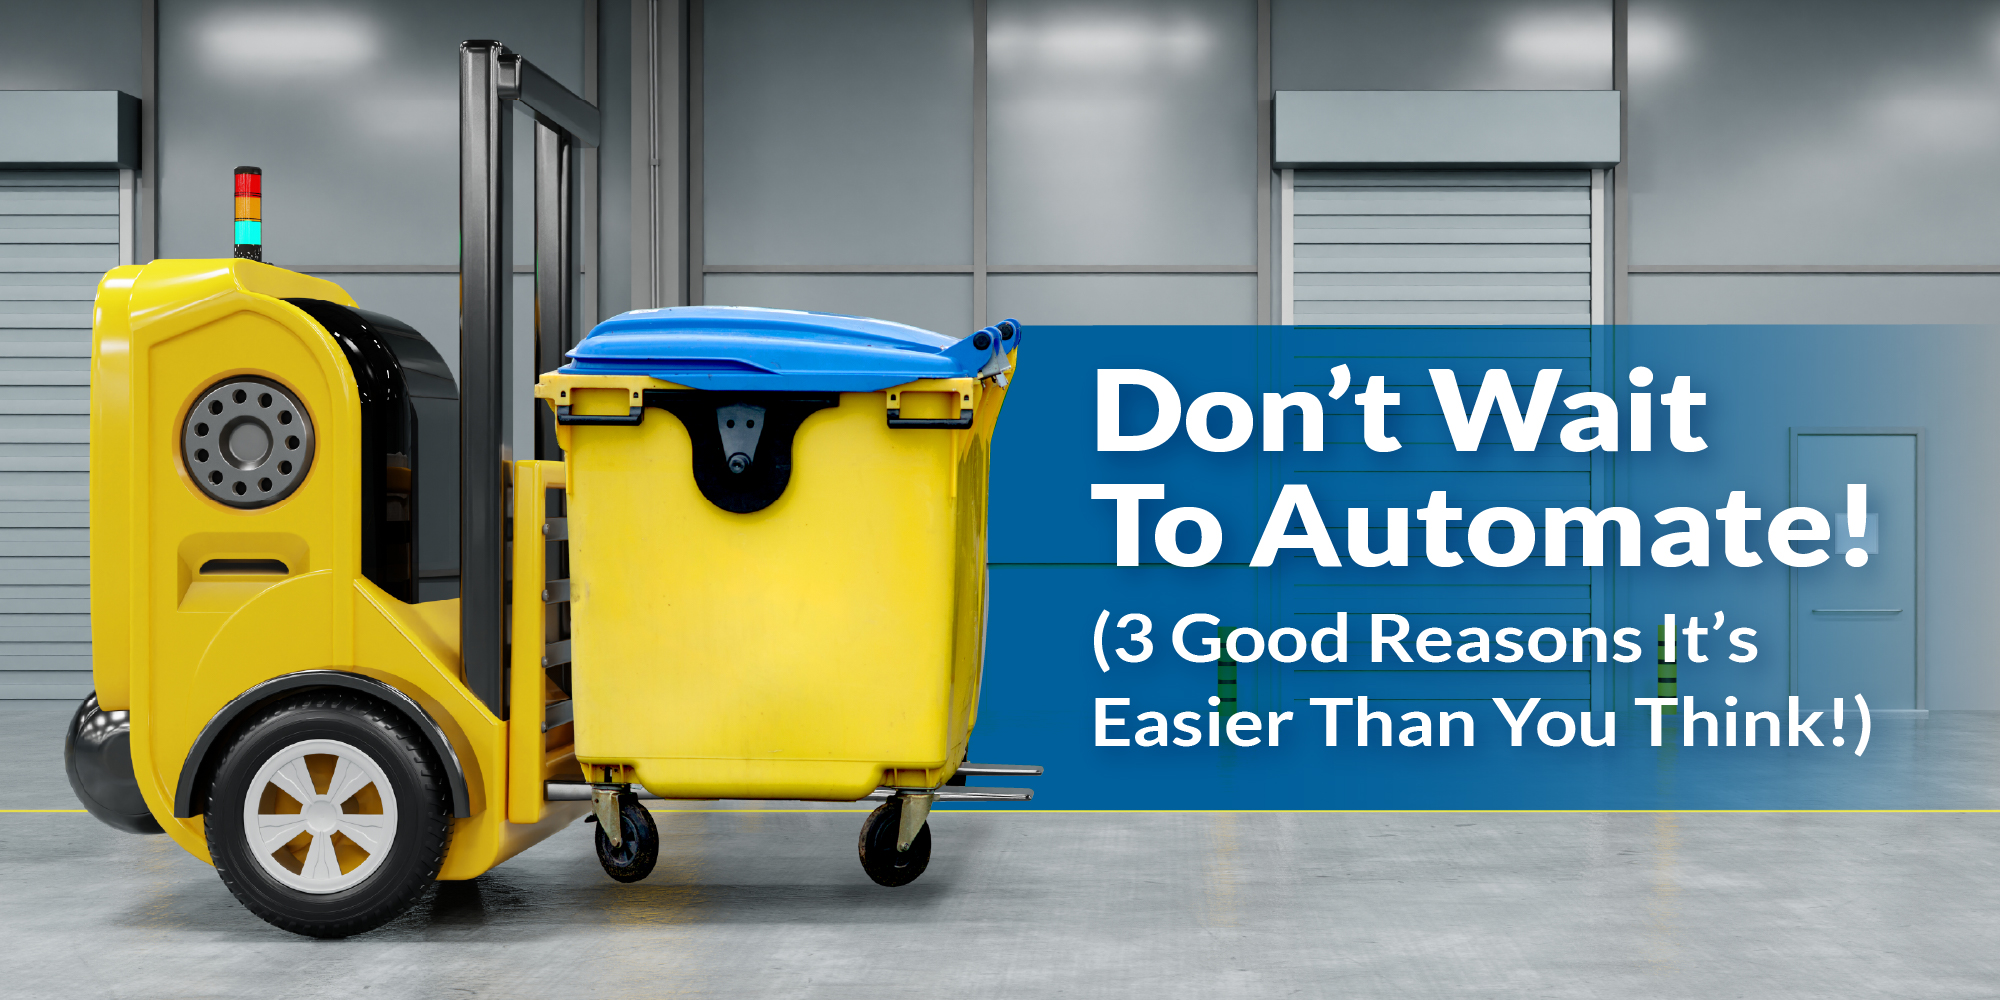 Don’t Wait to Automate! 3 Good Reasons It’s Easier Than You Think!